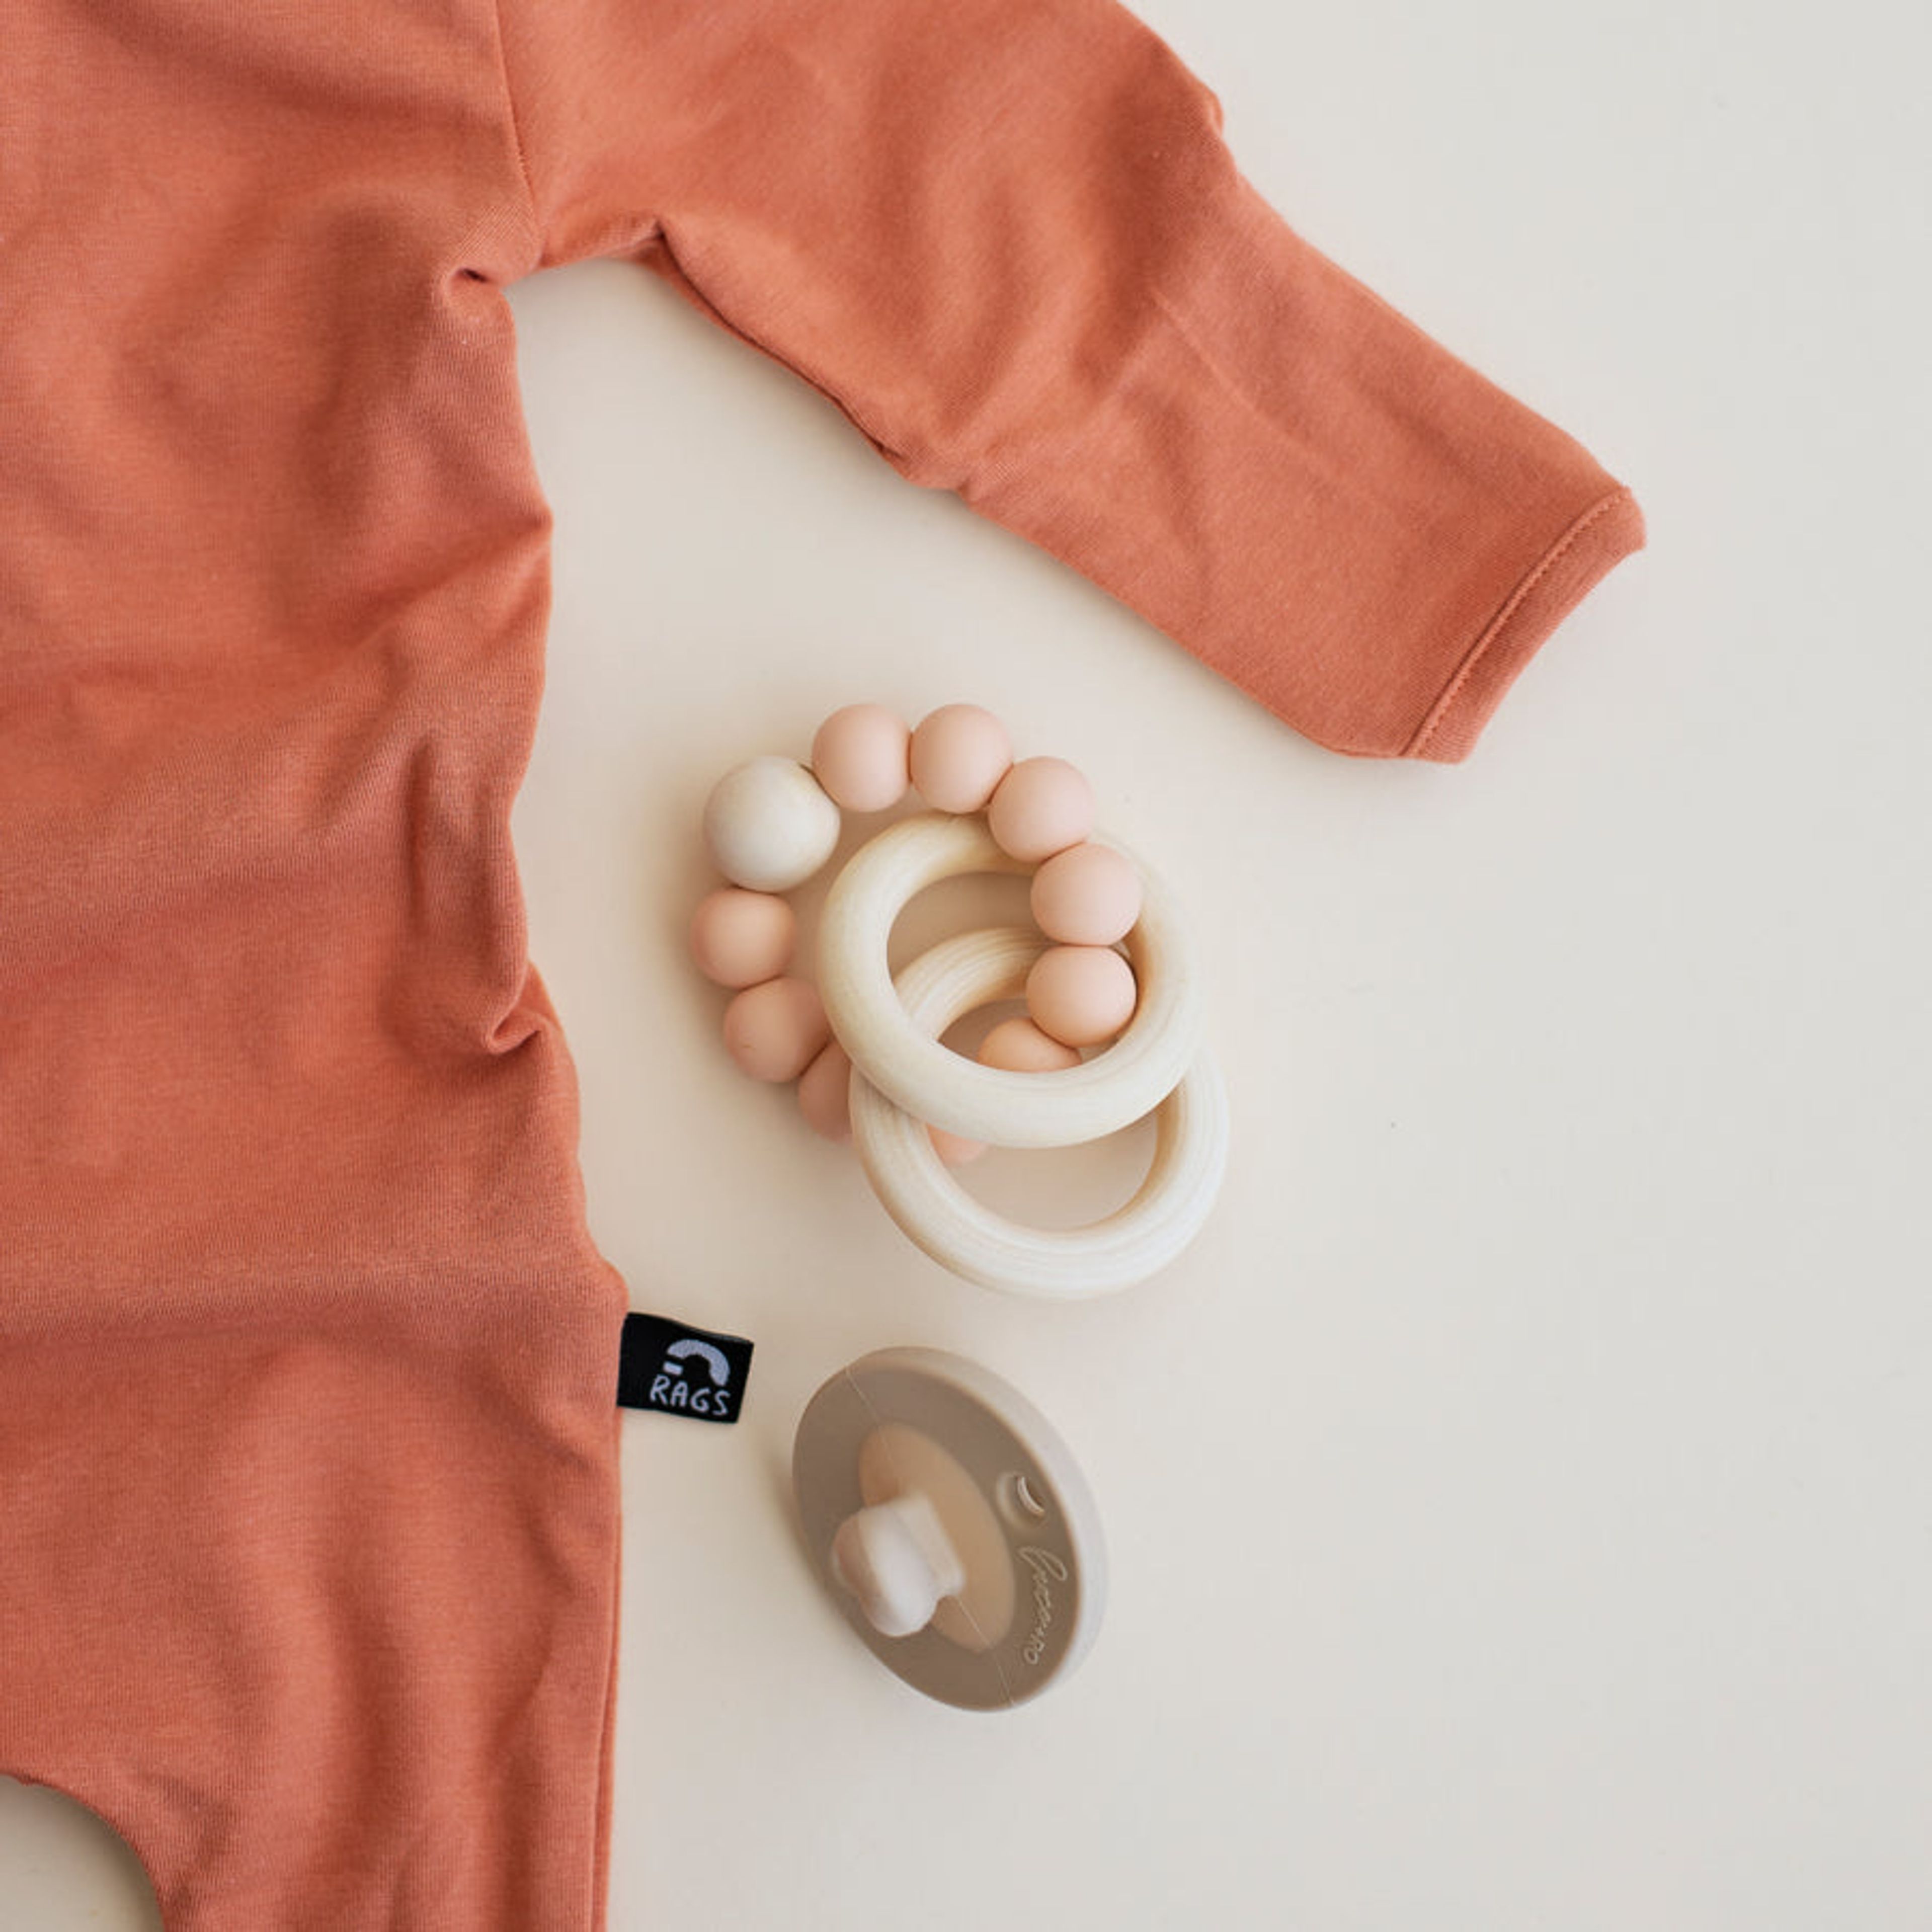 Silicone and Wood Ring Teething Toy | Soft Peach